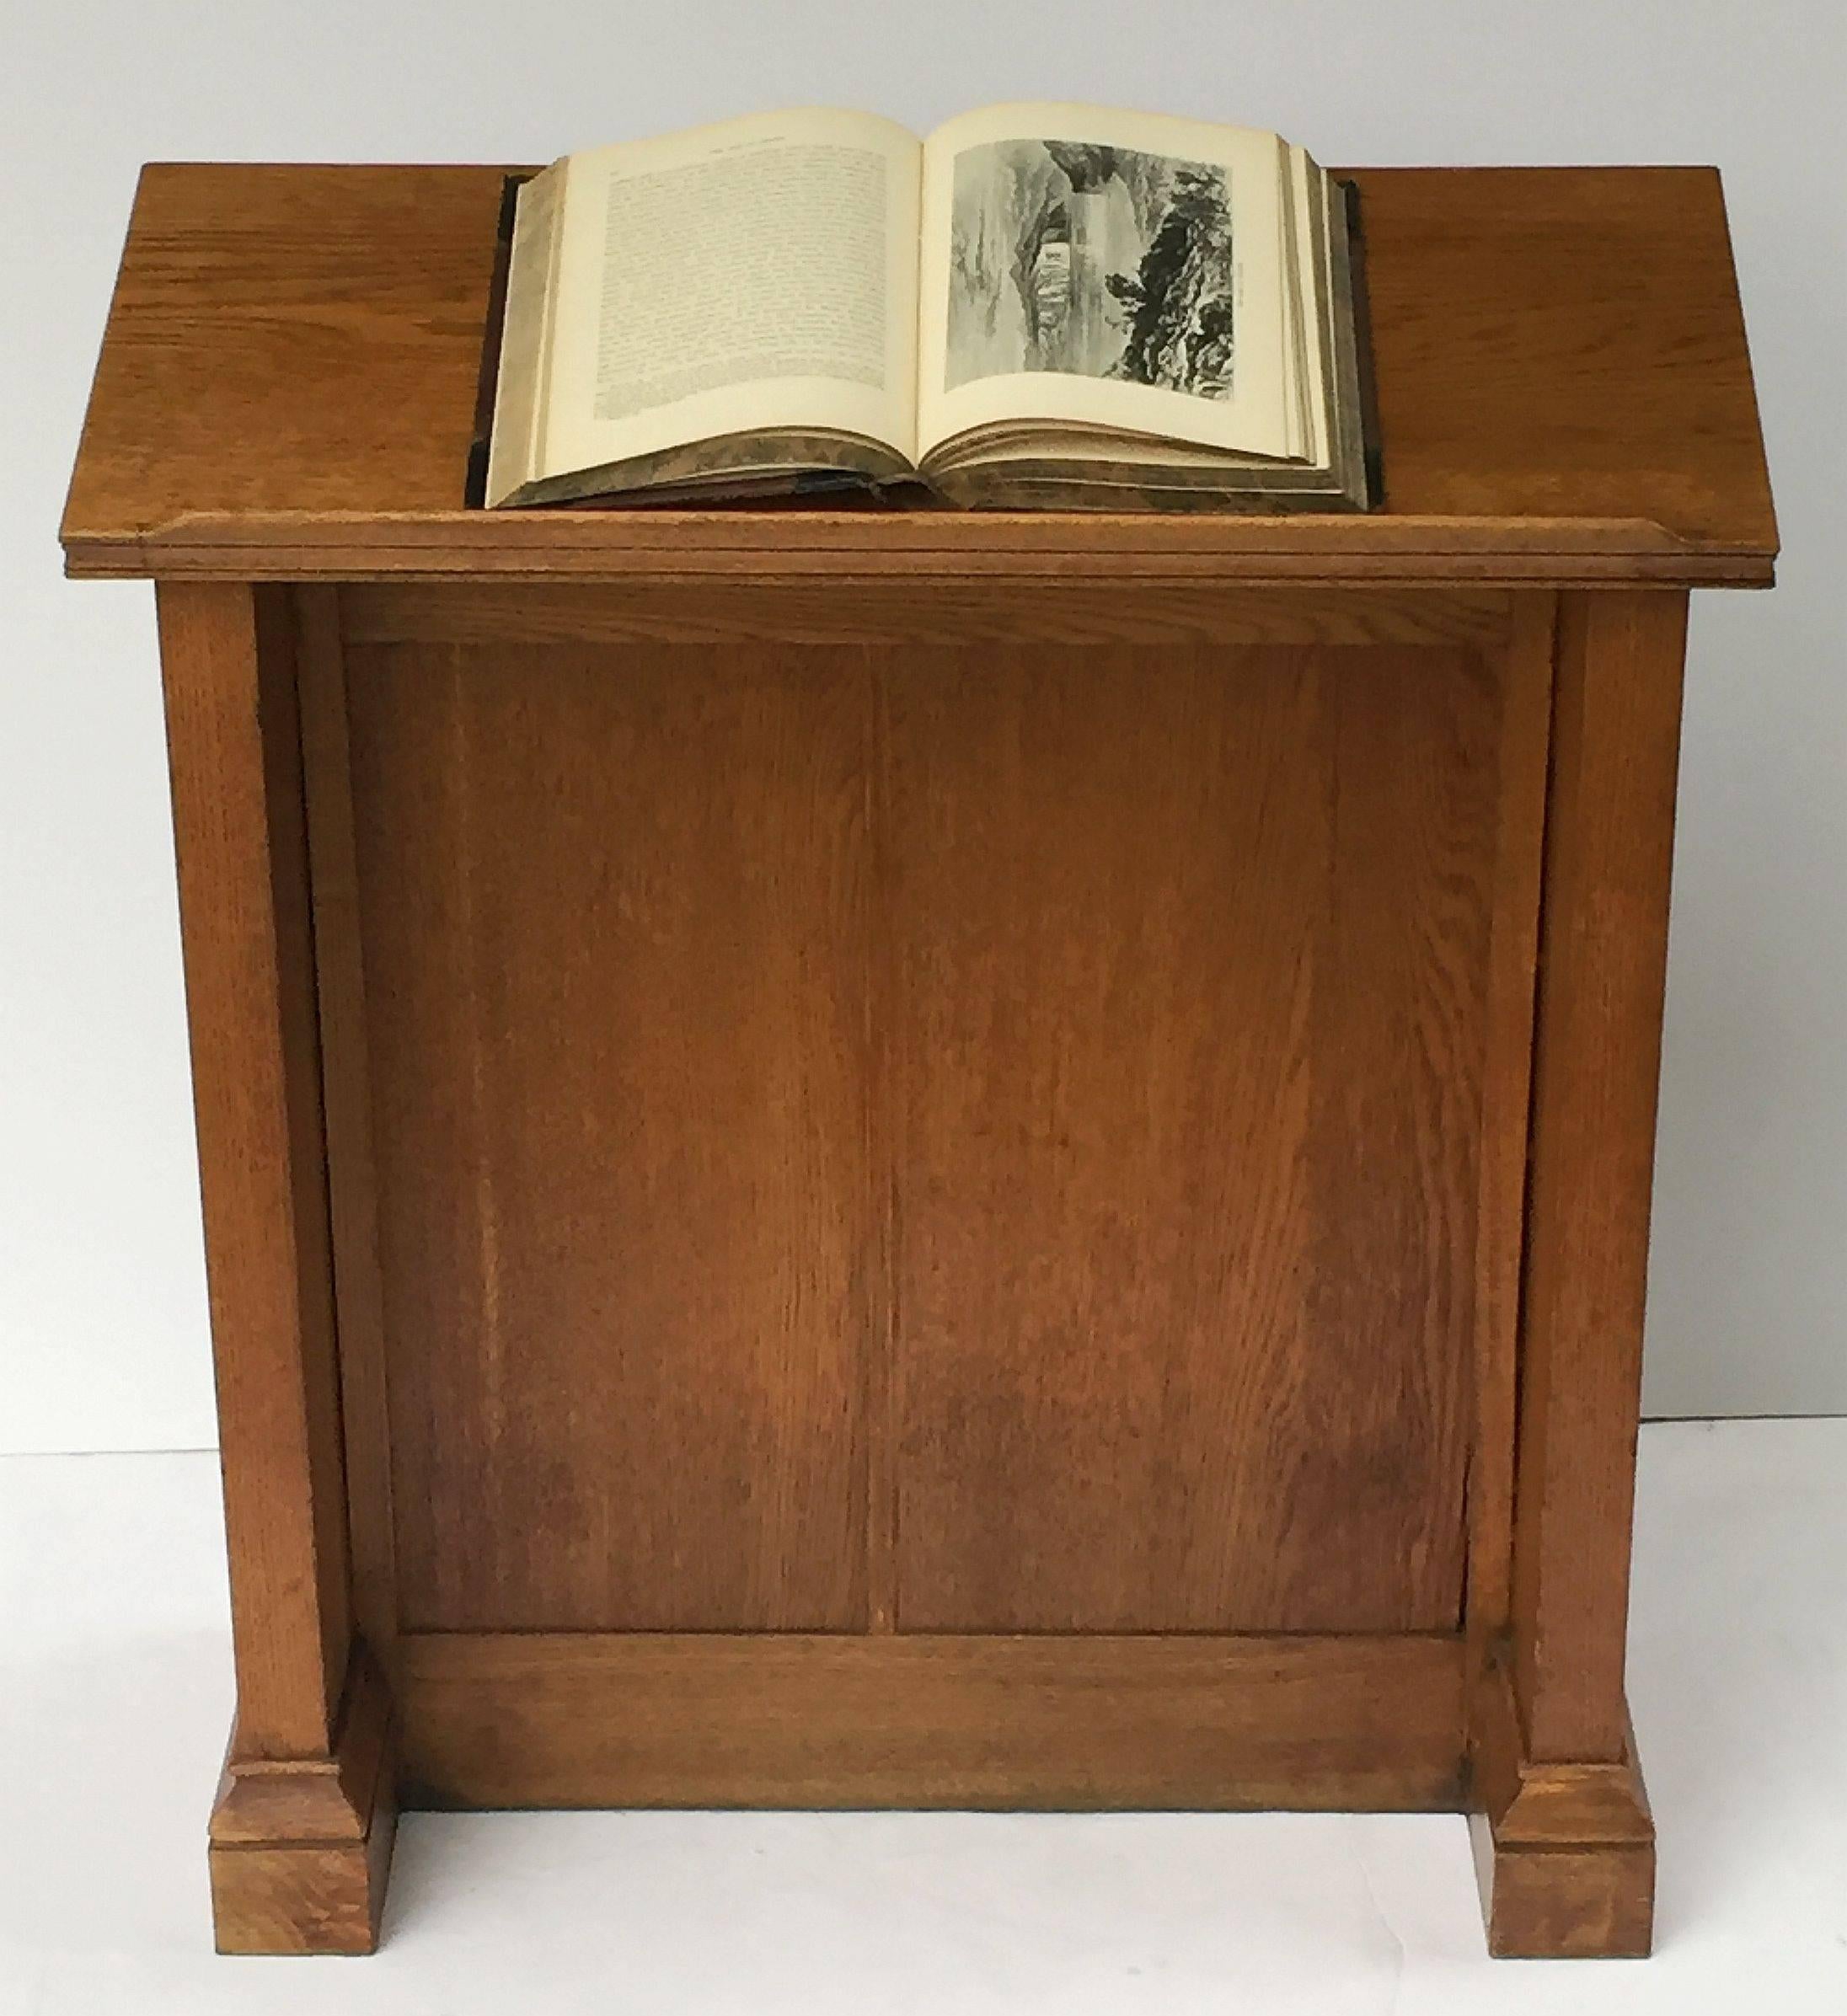 20th Century English Ecclesiastical Lectern in the Gothic Style